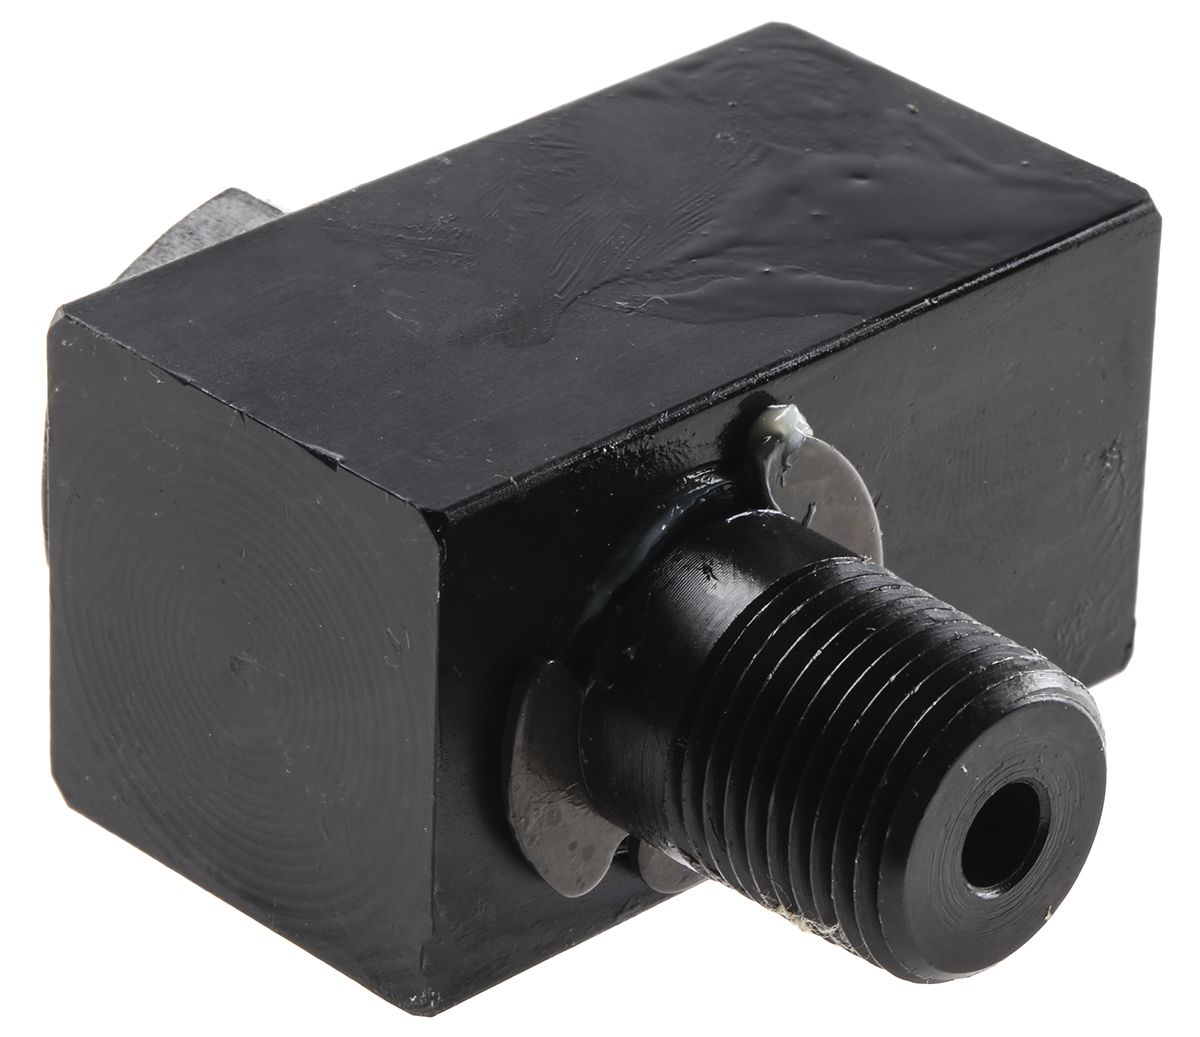 Enerpac Connector, Swivel Connector for use with XA-Series Air Driven Hydraulic Pump